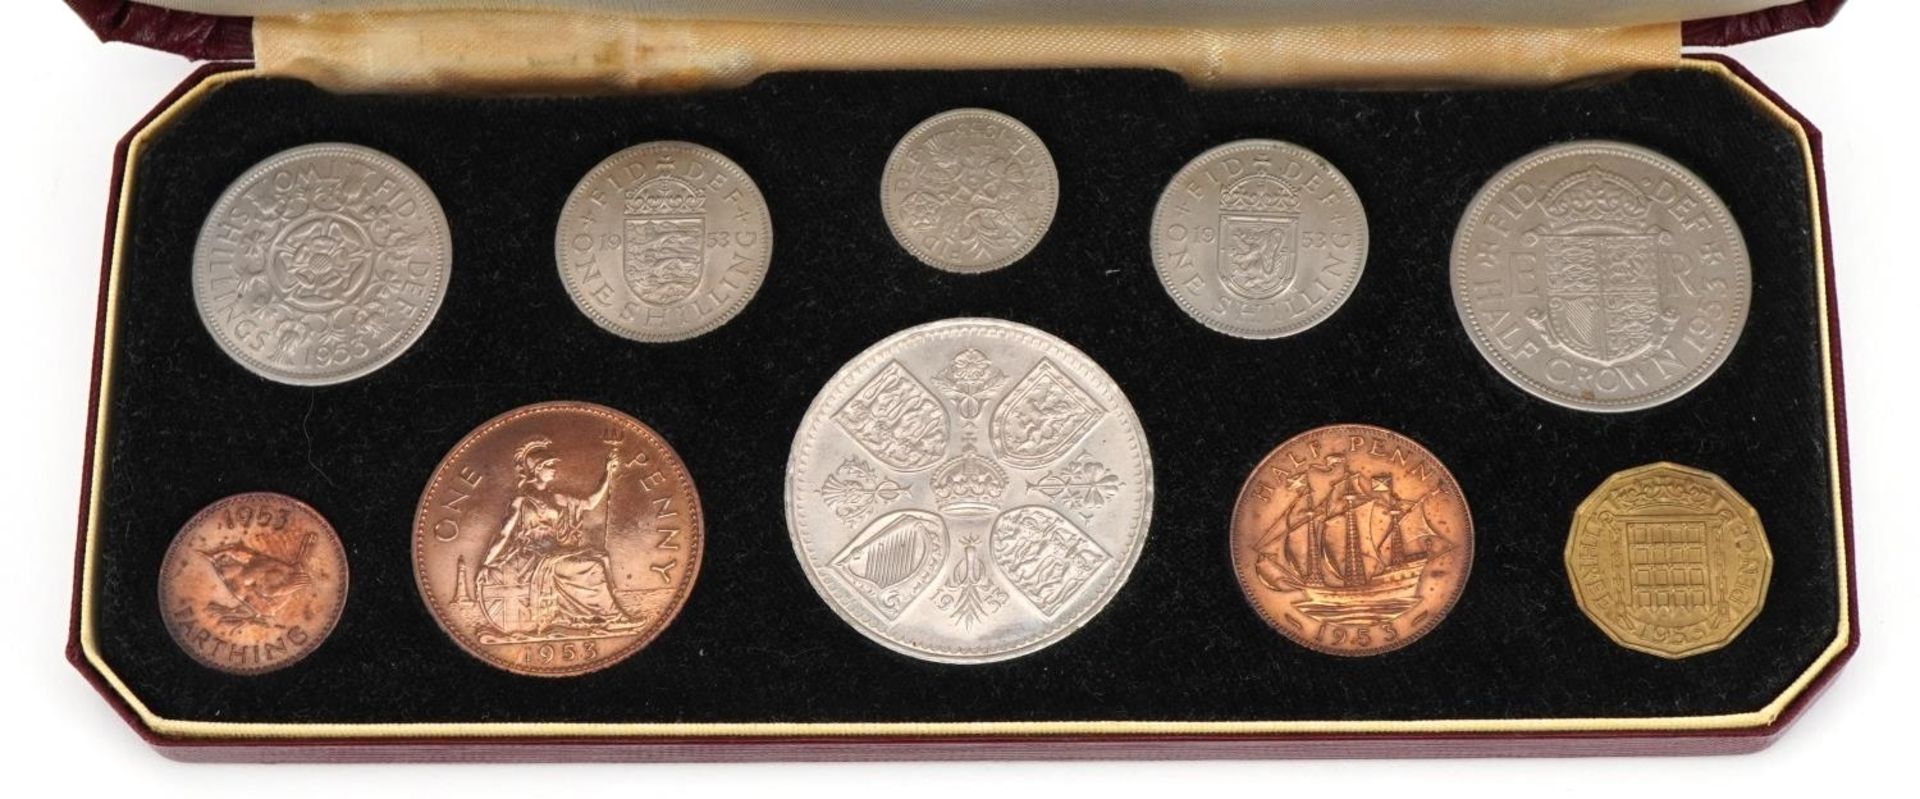 Elizabeth II 1953 Coronation specimen coin set housed in a fitted case - Image 2 of 3